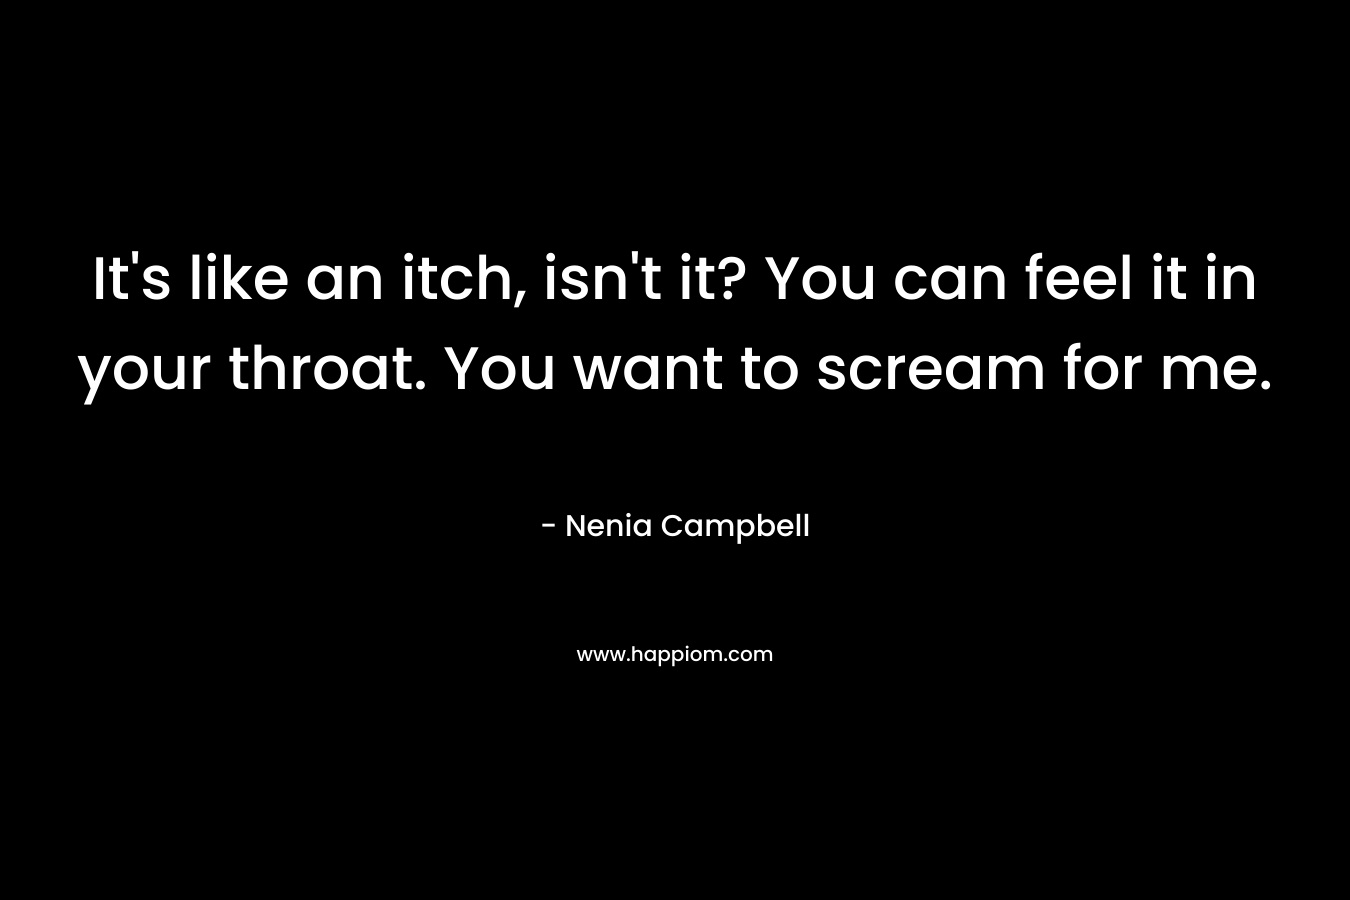 It’s like an itch, isn’t it? You can feel it in your throat. You want to scream for me. – Nenia Campbell